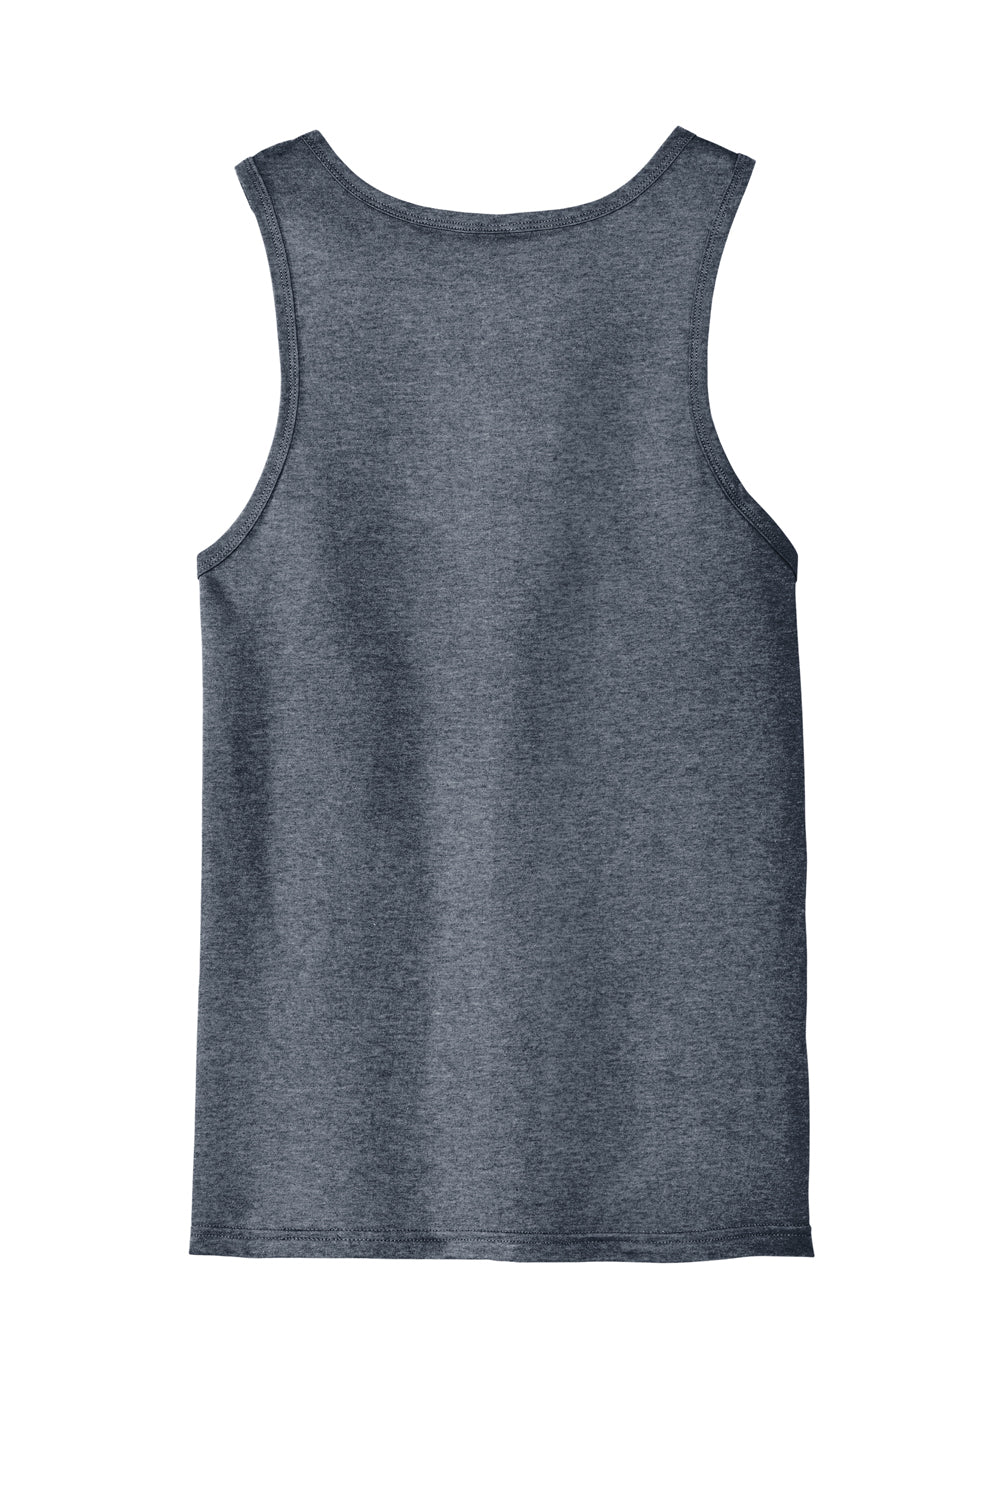 District DT5300 Mens The Concert Tank Top Heather Navy Blue Flat Back